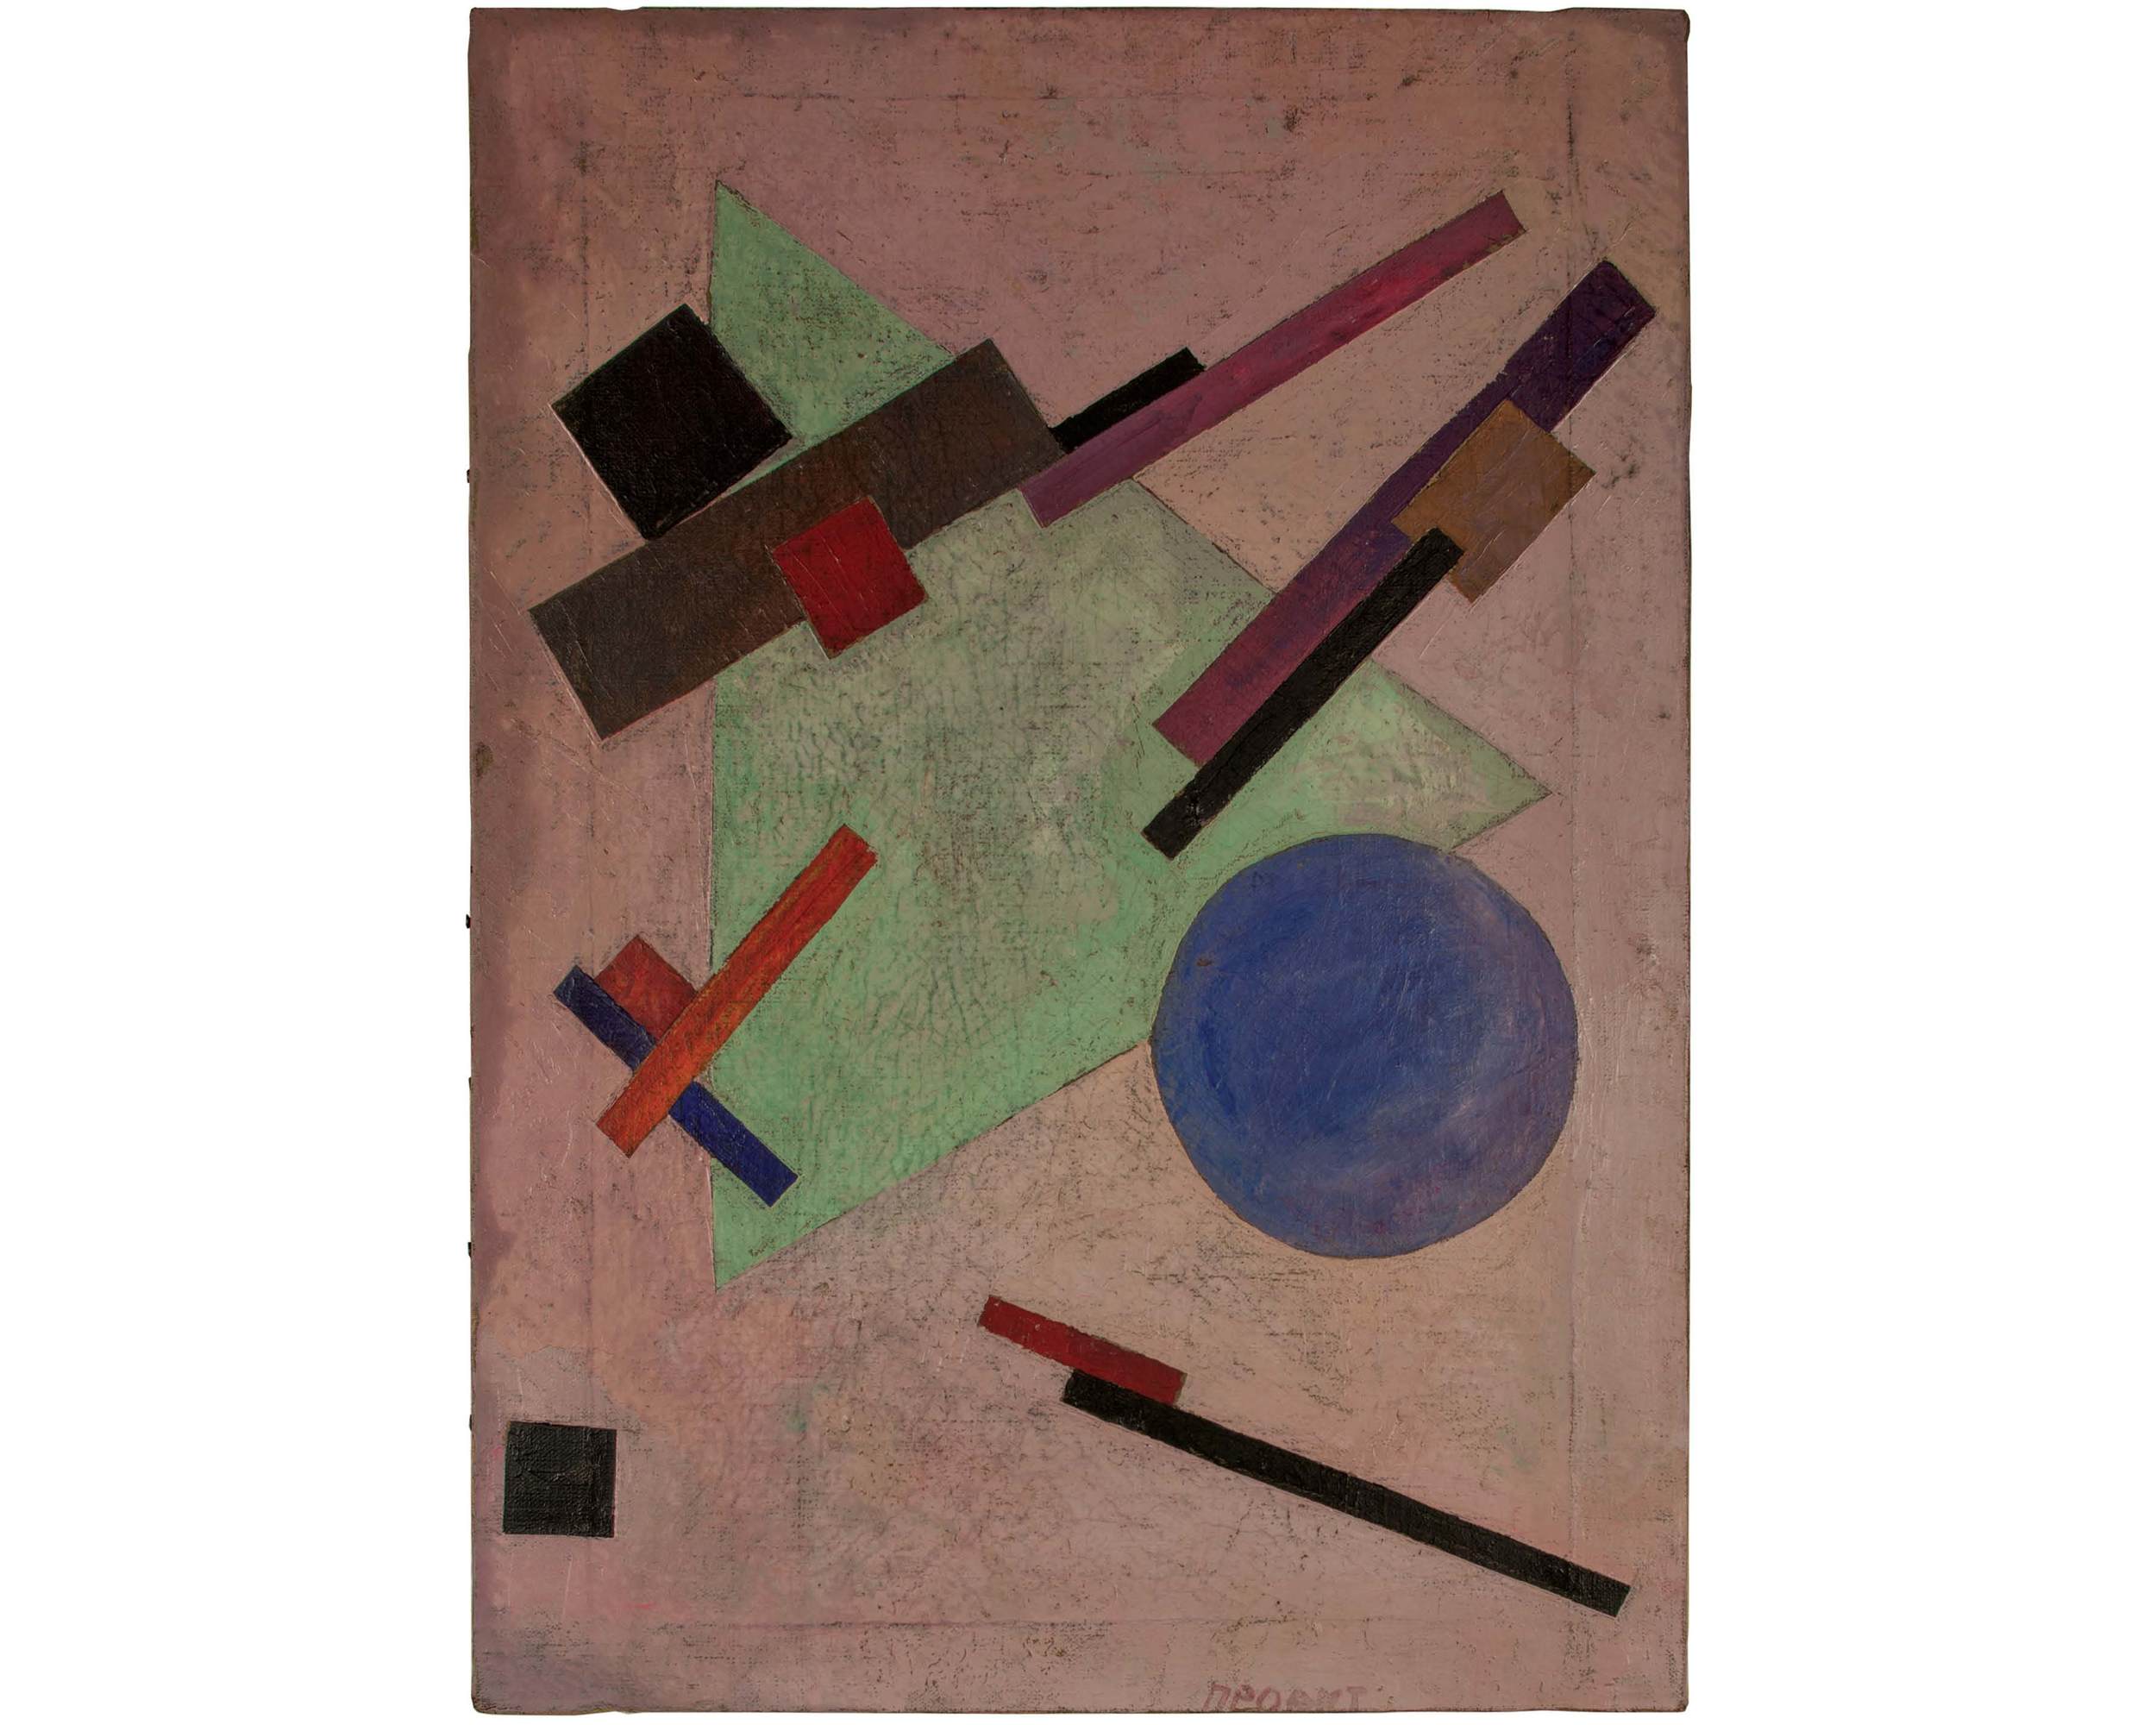   Unattributed. Unsigned.     In the style of Kasimir Malevich.    Text &nbsp;in Russian, lower right front corner, translates to "Project". &nbsp;  Oil on canvas. 50 x 36 cm.  &nbsp; 